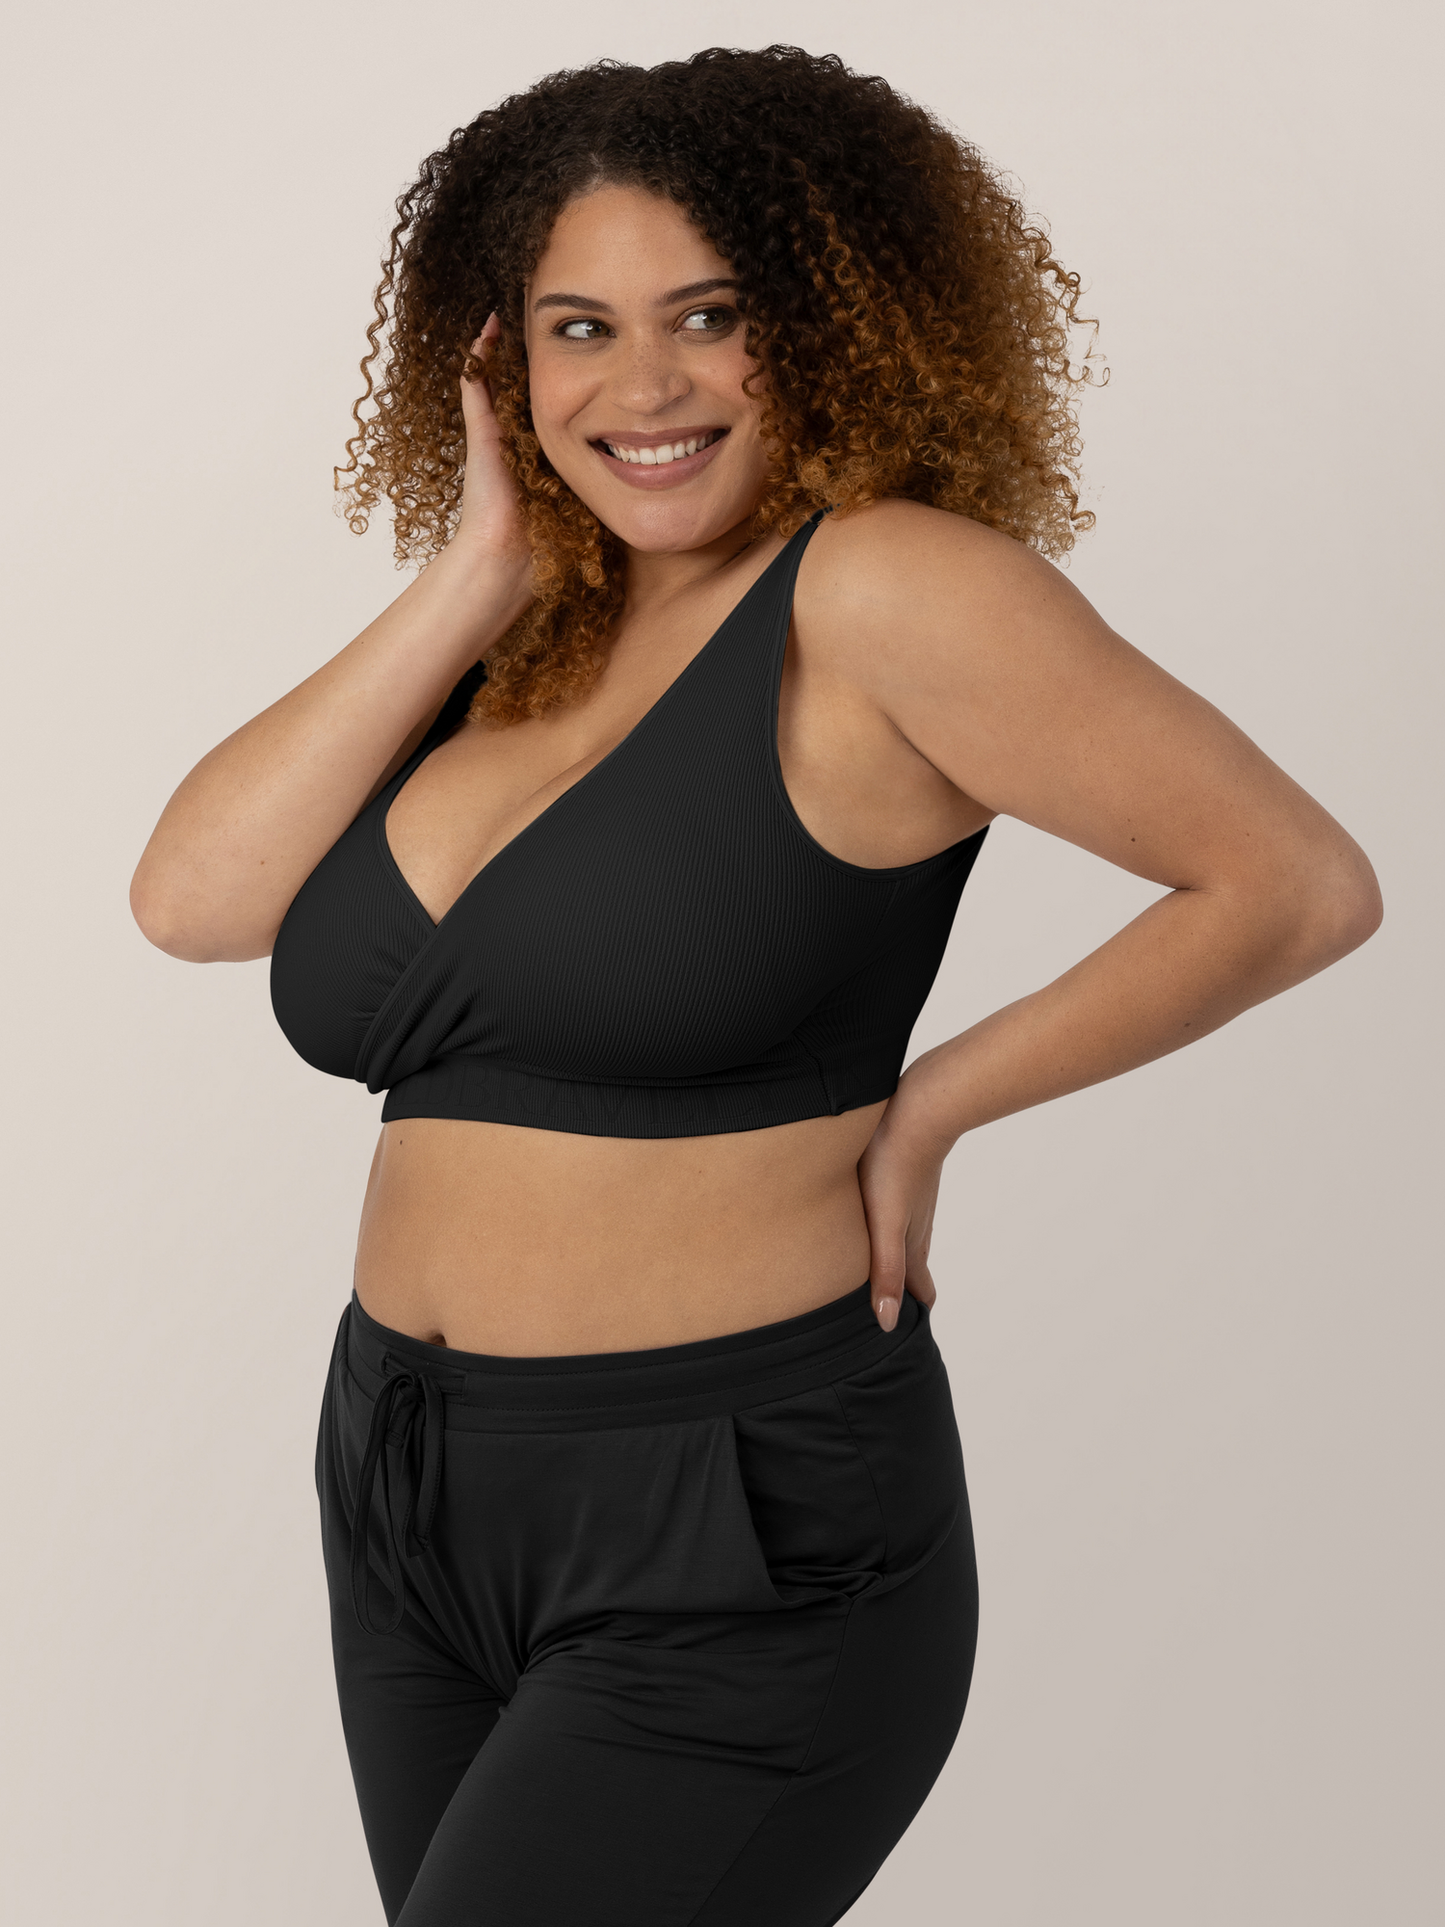 Model wearing the Sublime® Adjustable Crossover Nursing & Lounge Bra in Black with her hand on her hips and on her cheek.